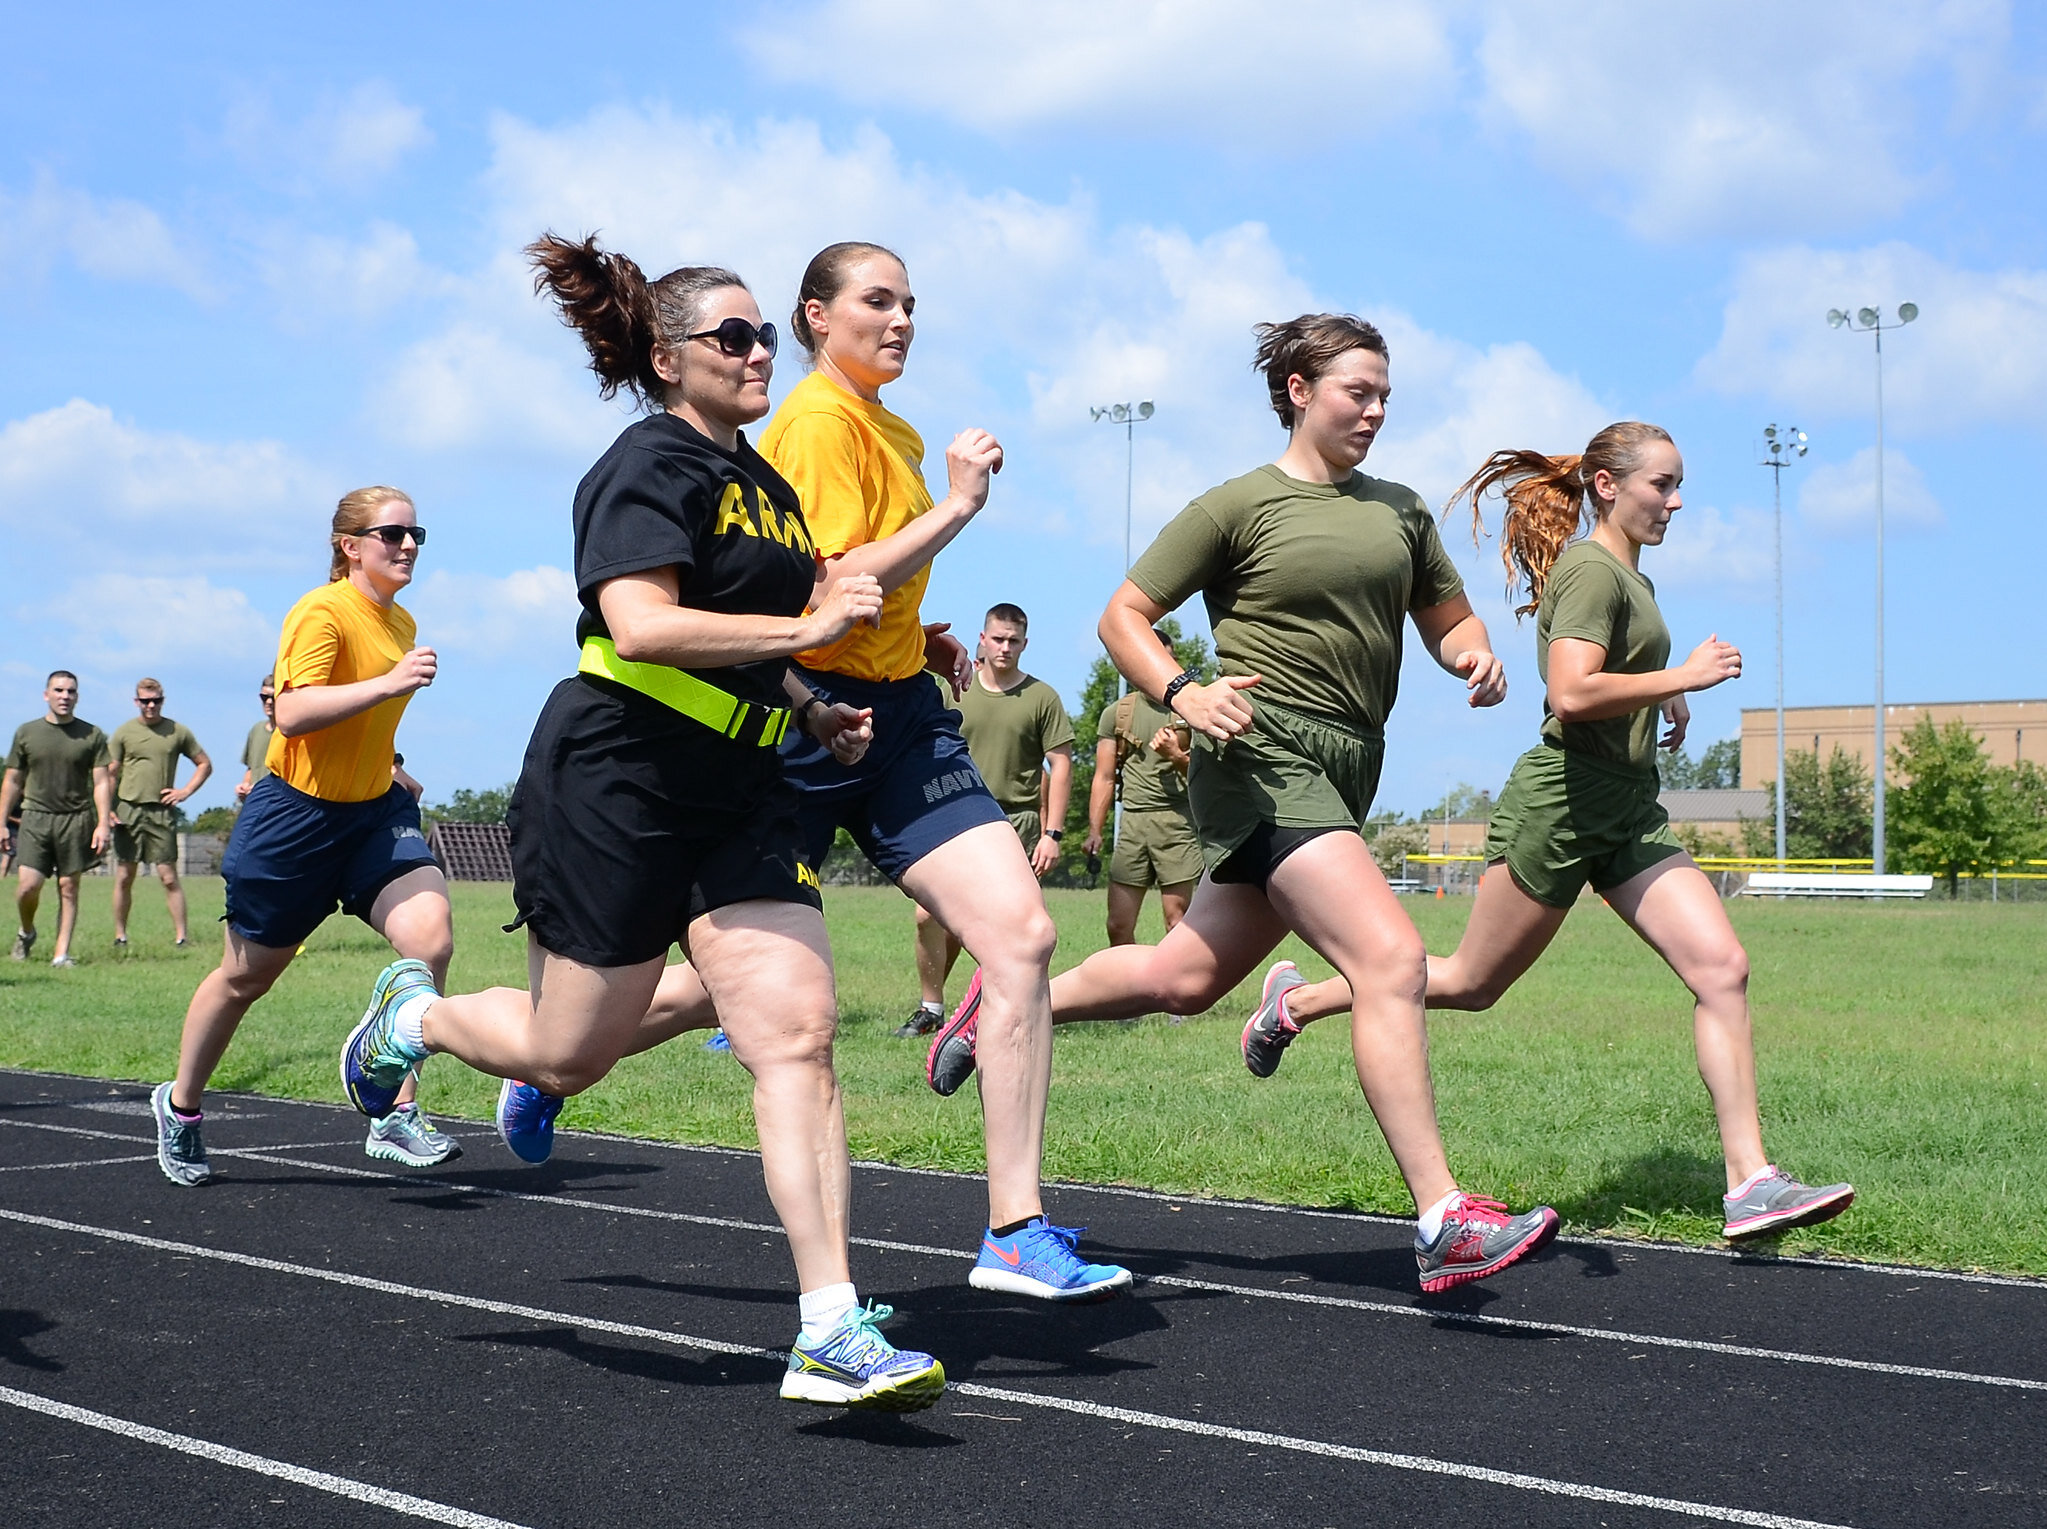 Track and Field - Sports Day at Fort Belvoir